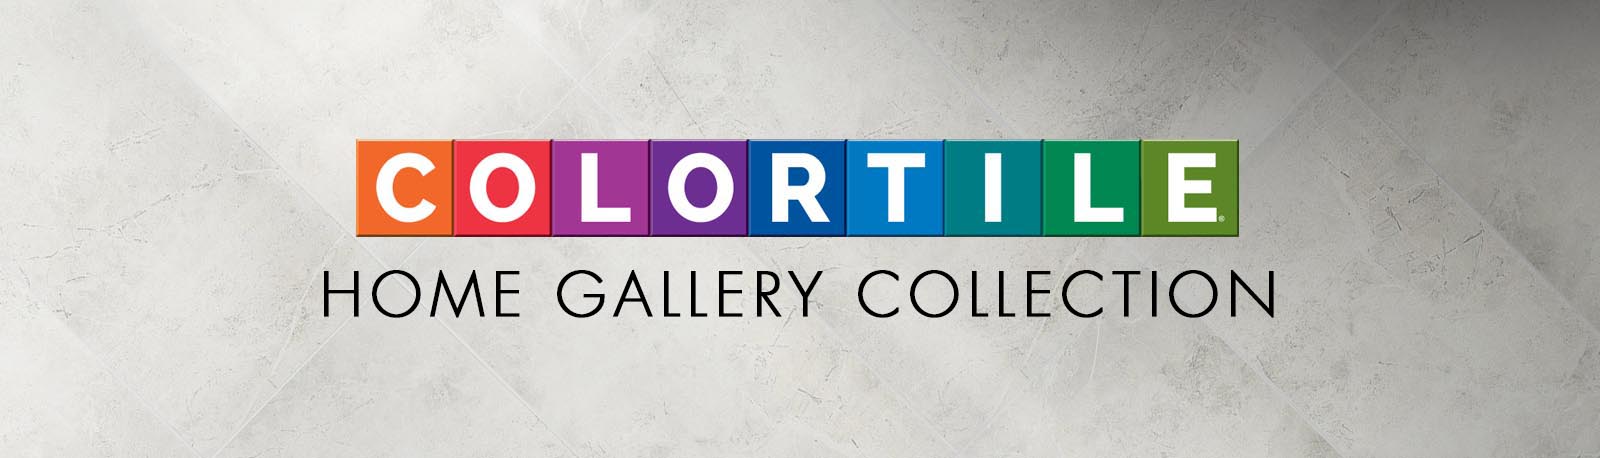 COLORTILE Home Gallery Tile 2